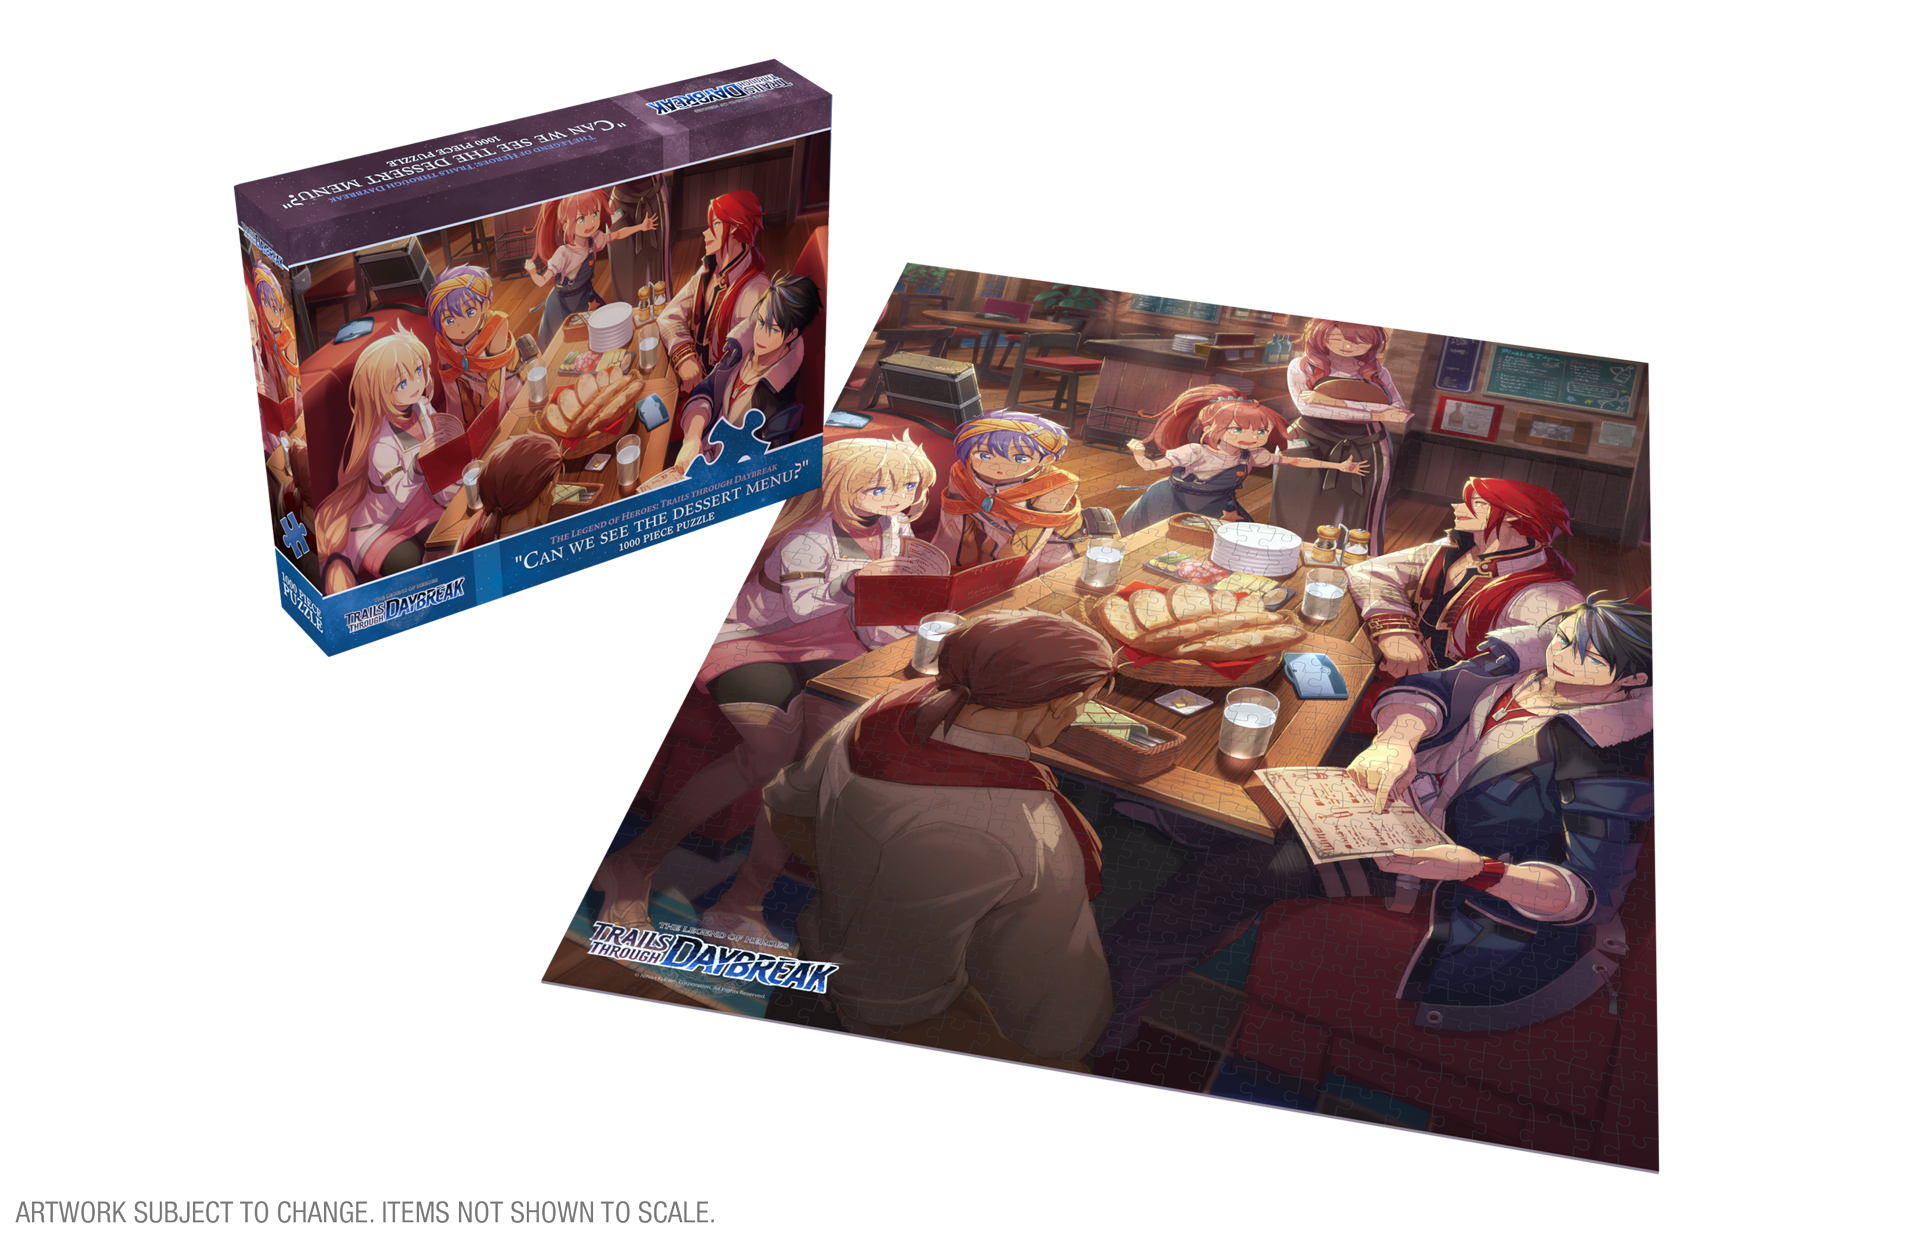 Trails through Daybreak - "Can we see the dessert menu?" 1000-piece puzzle